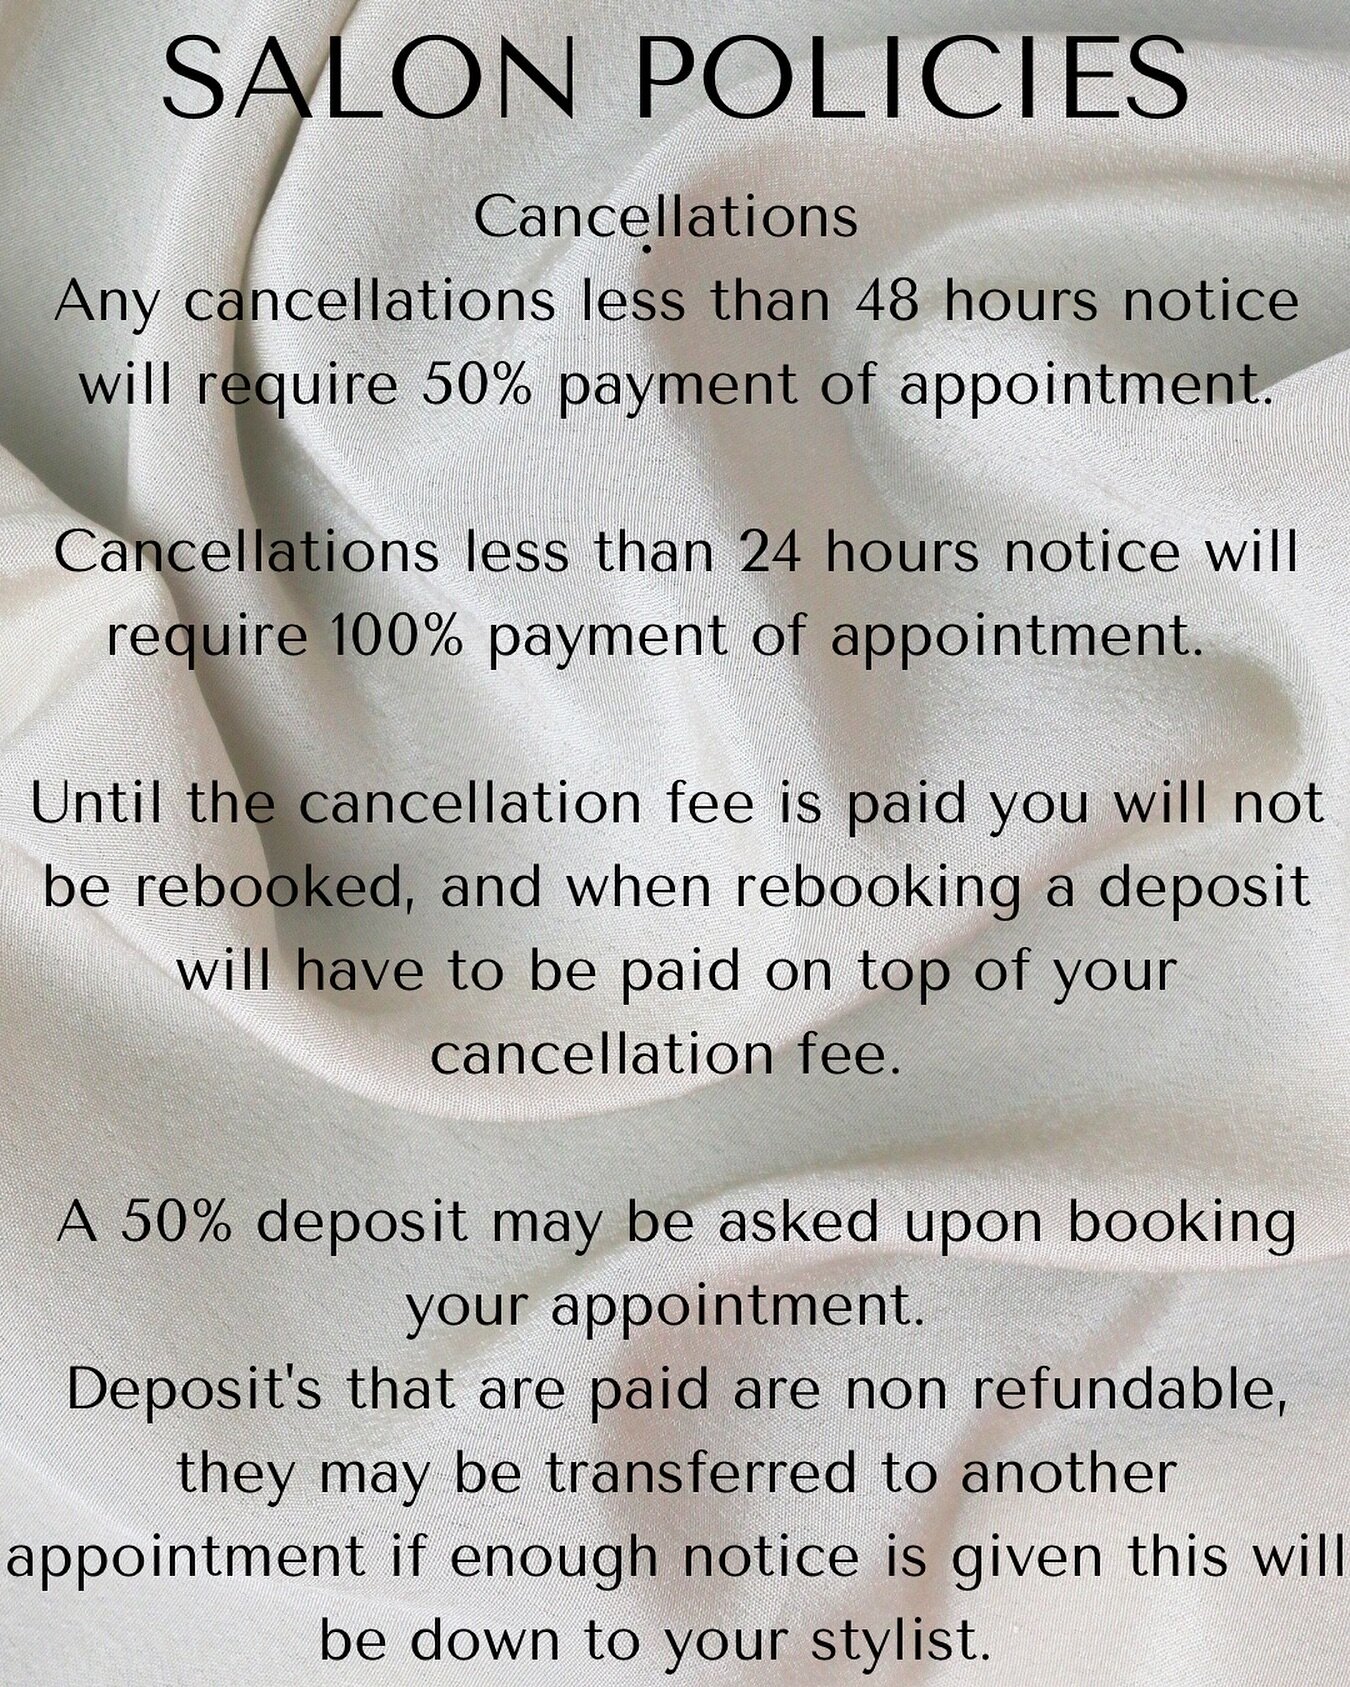 Unfortunately we as a salon have experienced a lot of no shows and last minute cancellations in the past 6 months. We now have to enforce our cancellation policy and deposit system, our stylists cannot keep losing out on income. We appreciate things 